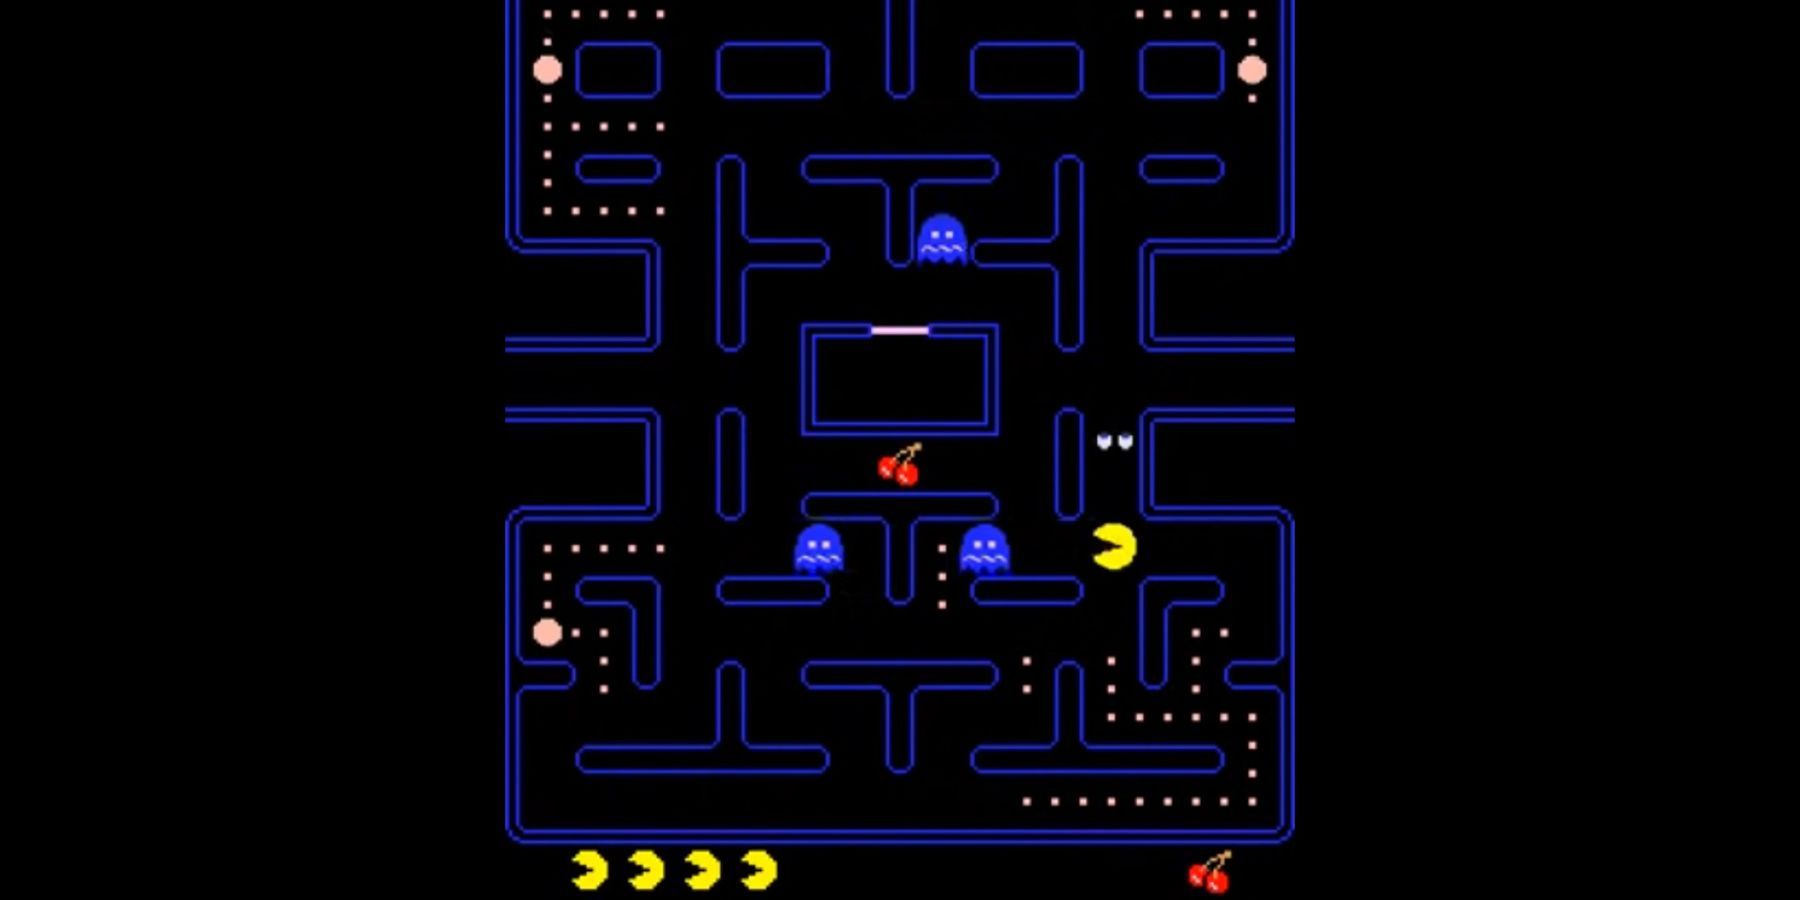 Pac-Man chases ghosts after eating a Power Pellet